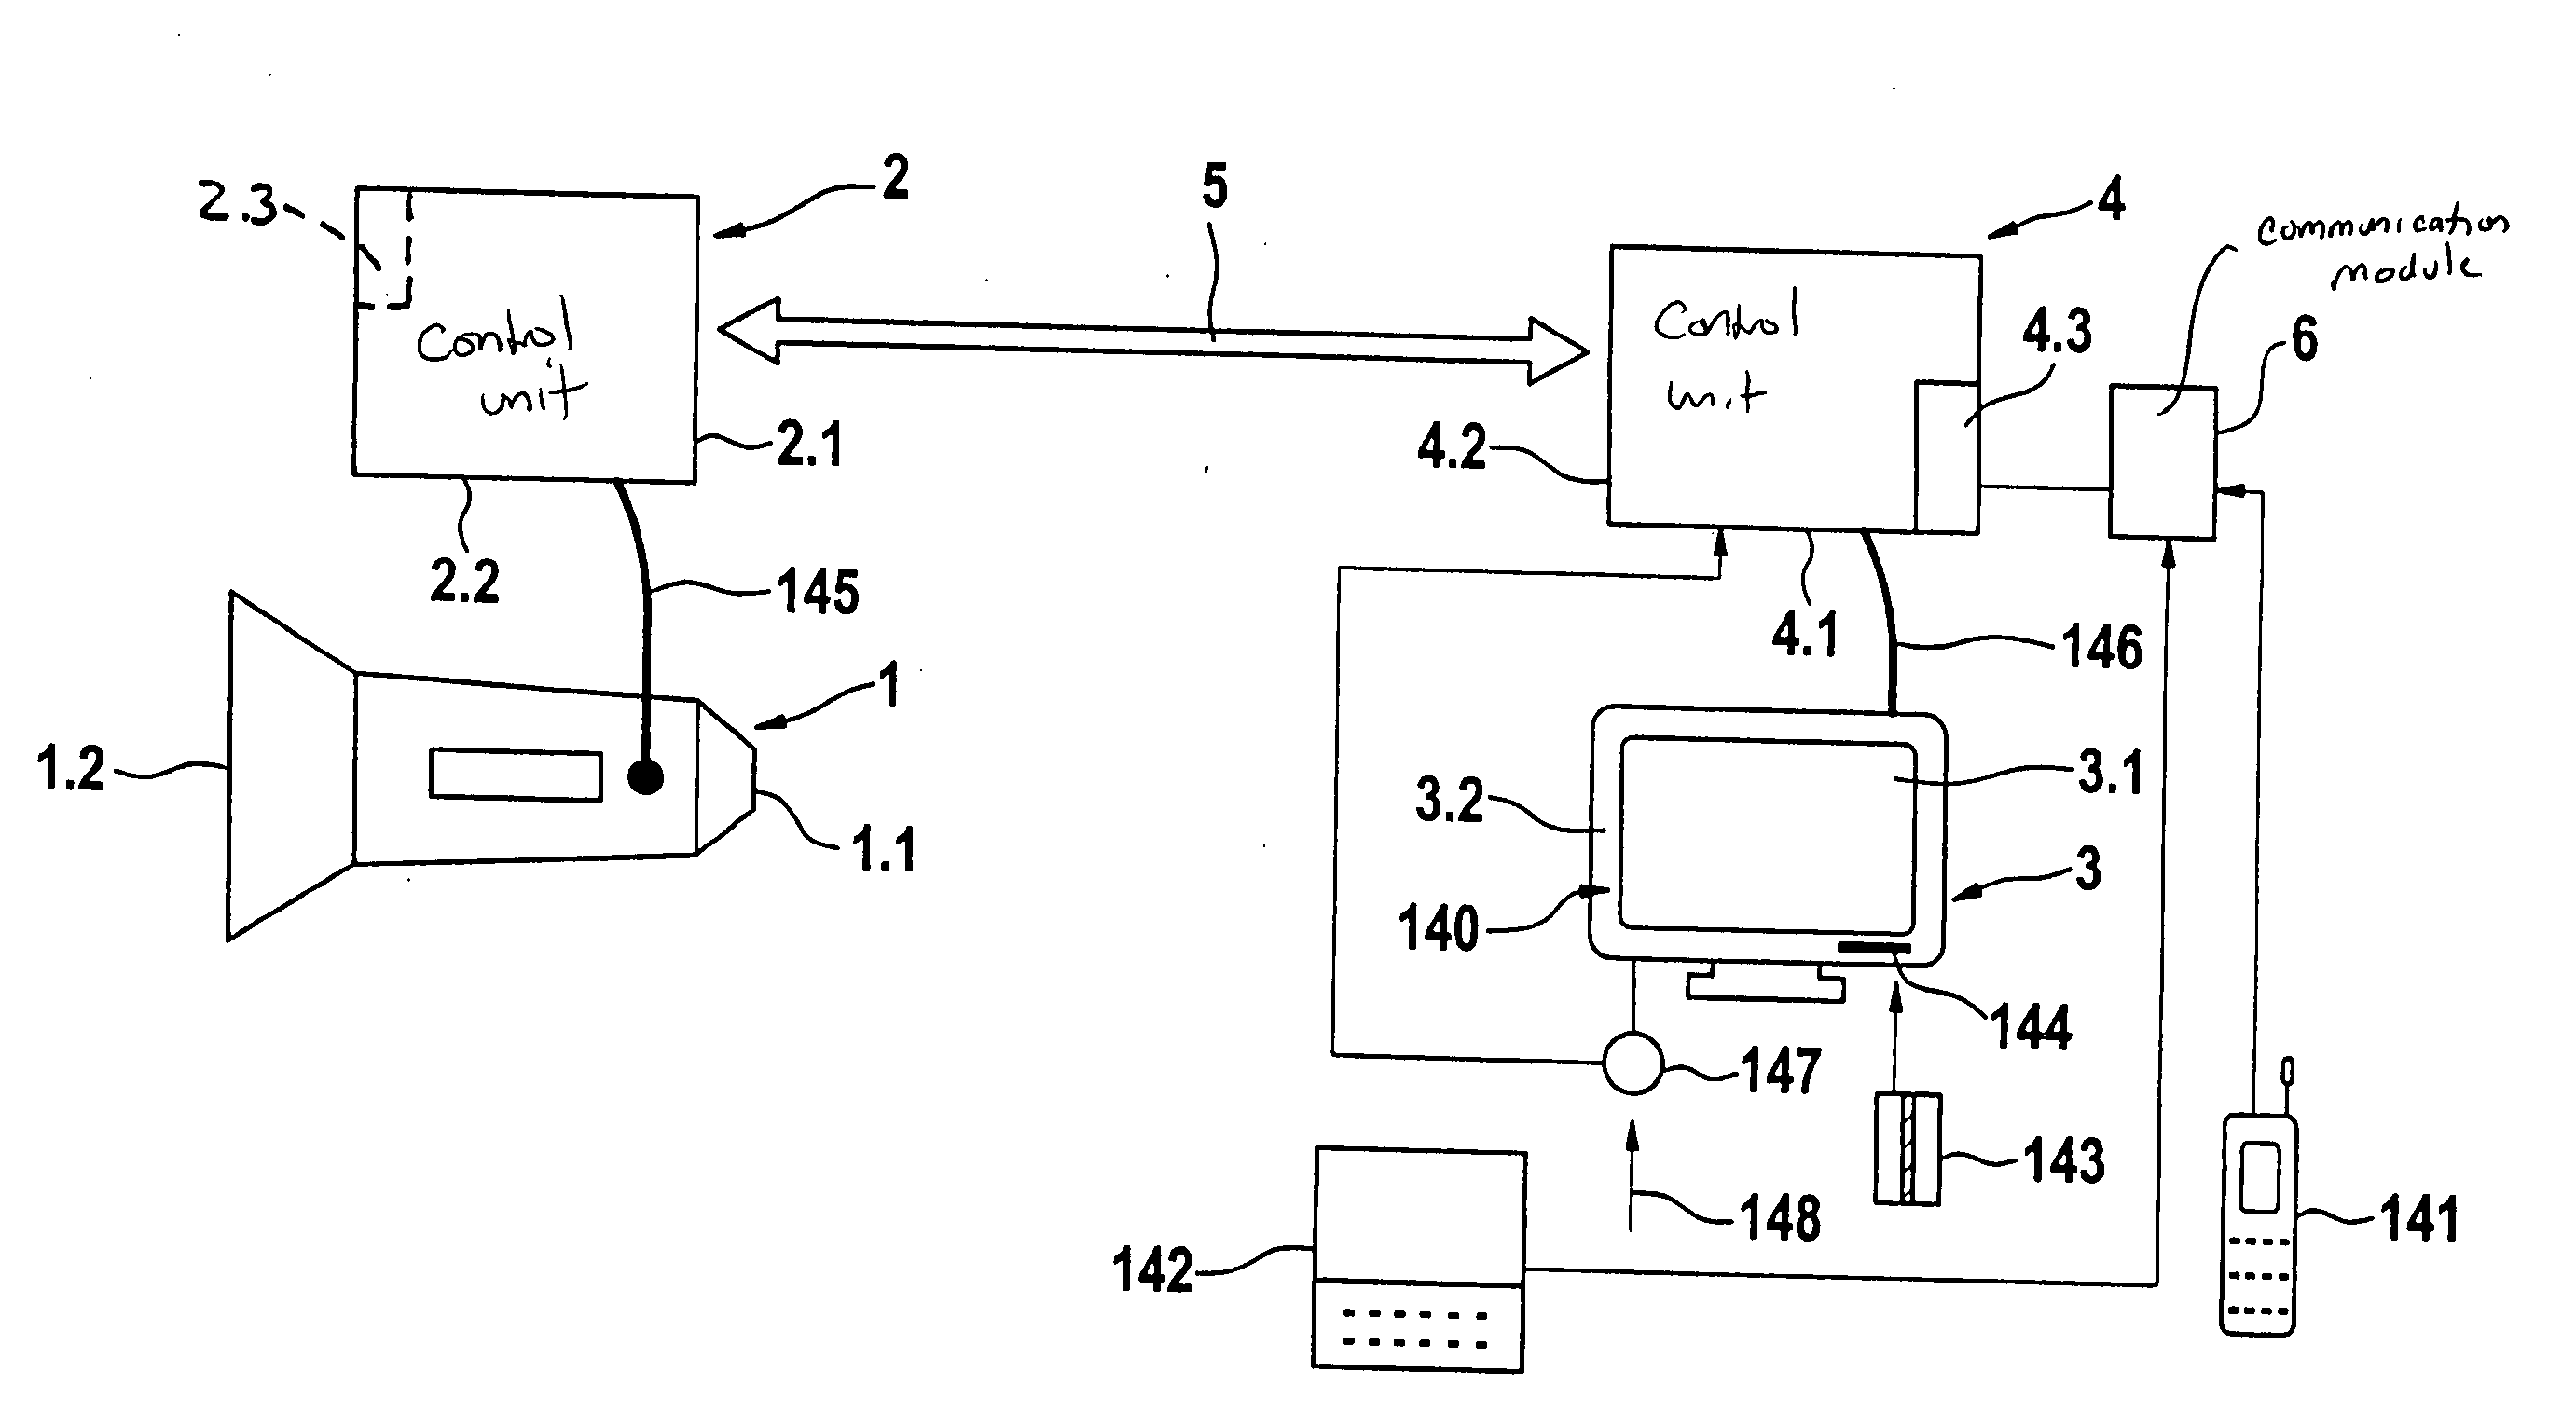 Method for configuring a transmission control for motor vehicles